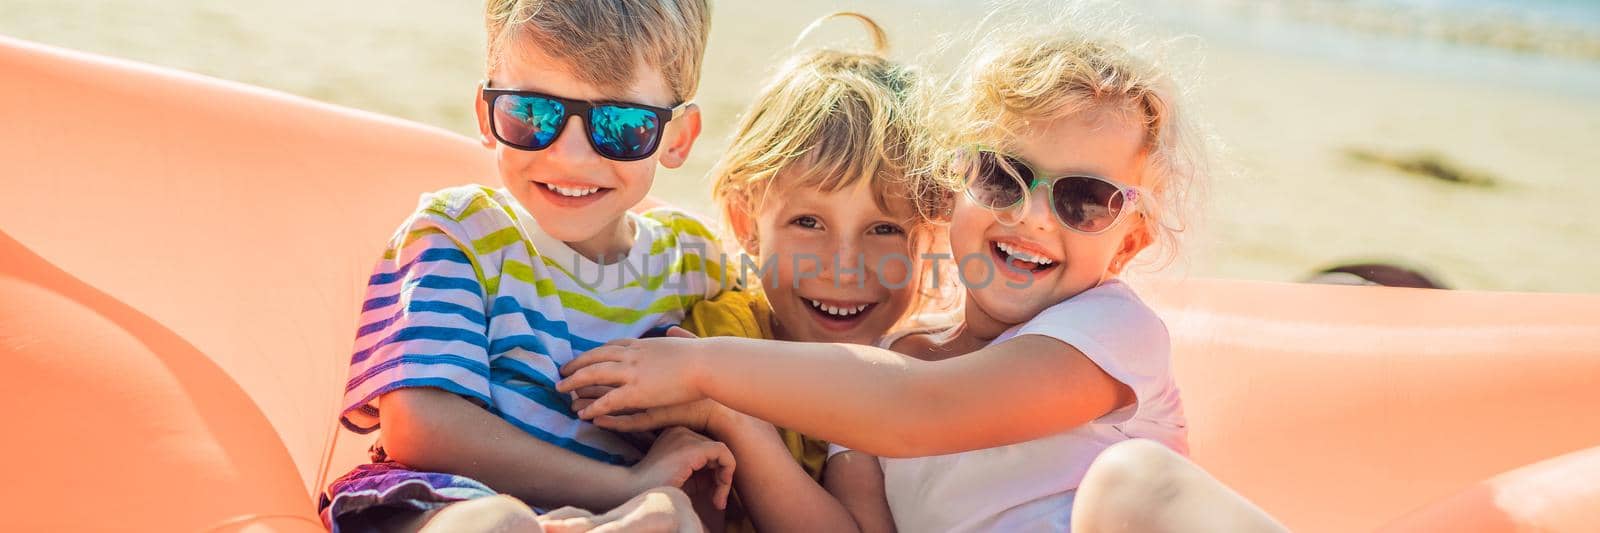 Children sit on an inflatable sofa against the sea and have fun BANNER, LONG FORMAT by galitskaya